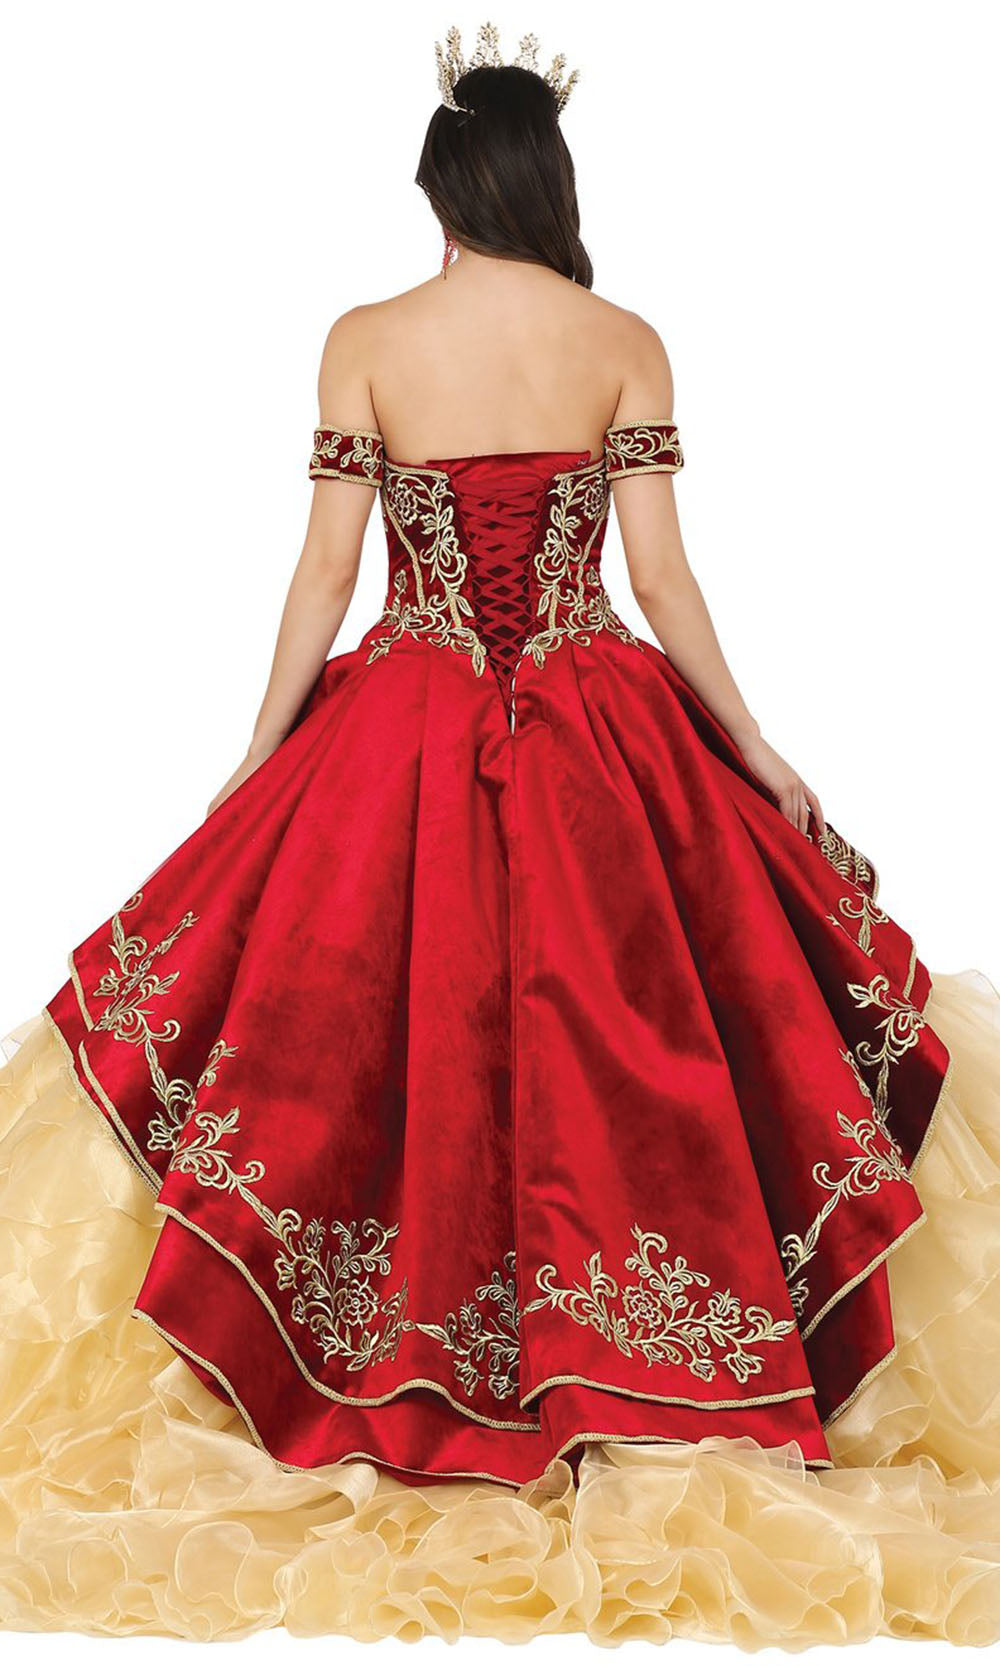 Dancing Queen - 1529 Embroidered Peplum Ruffled Ballgown In Red and Neutral